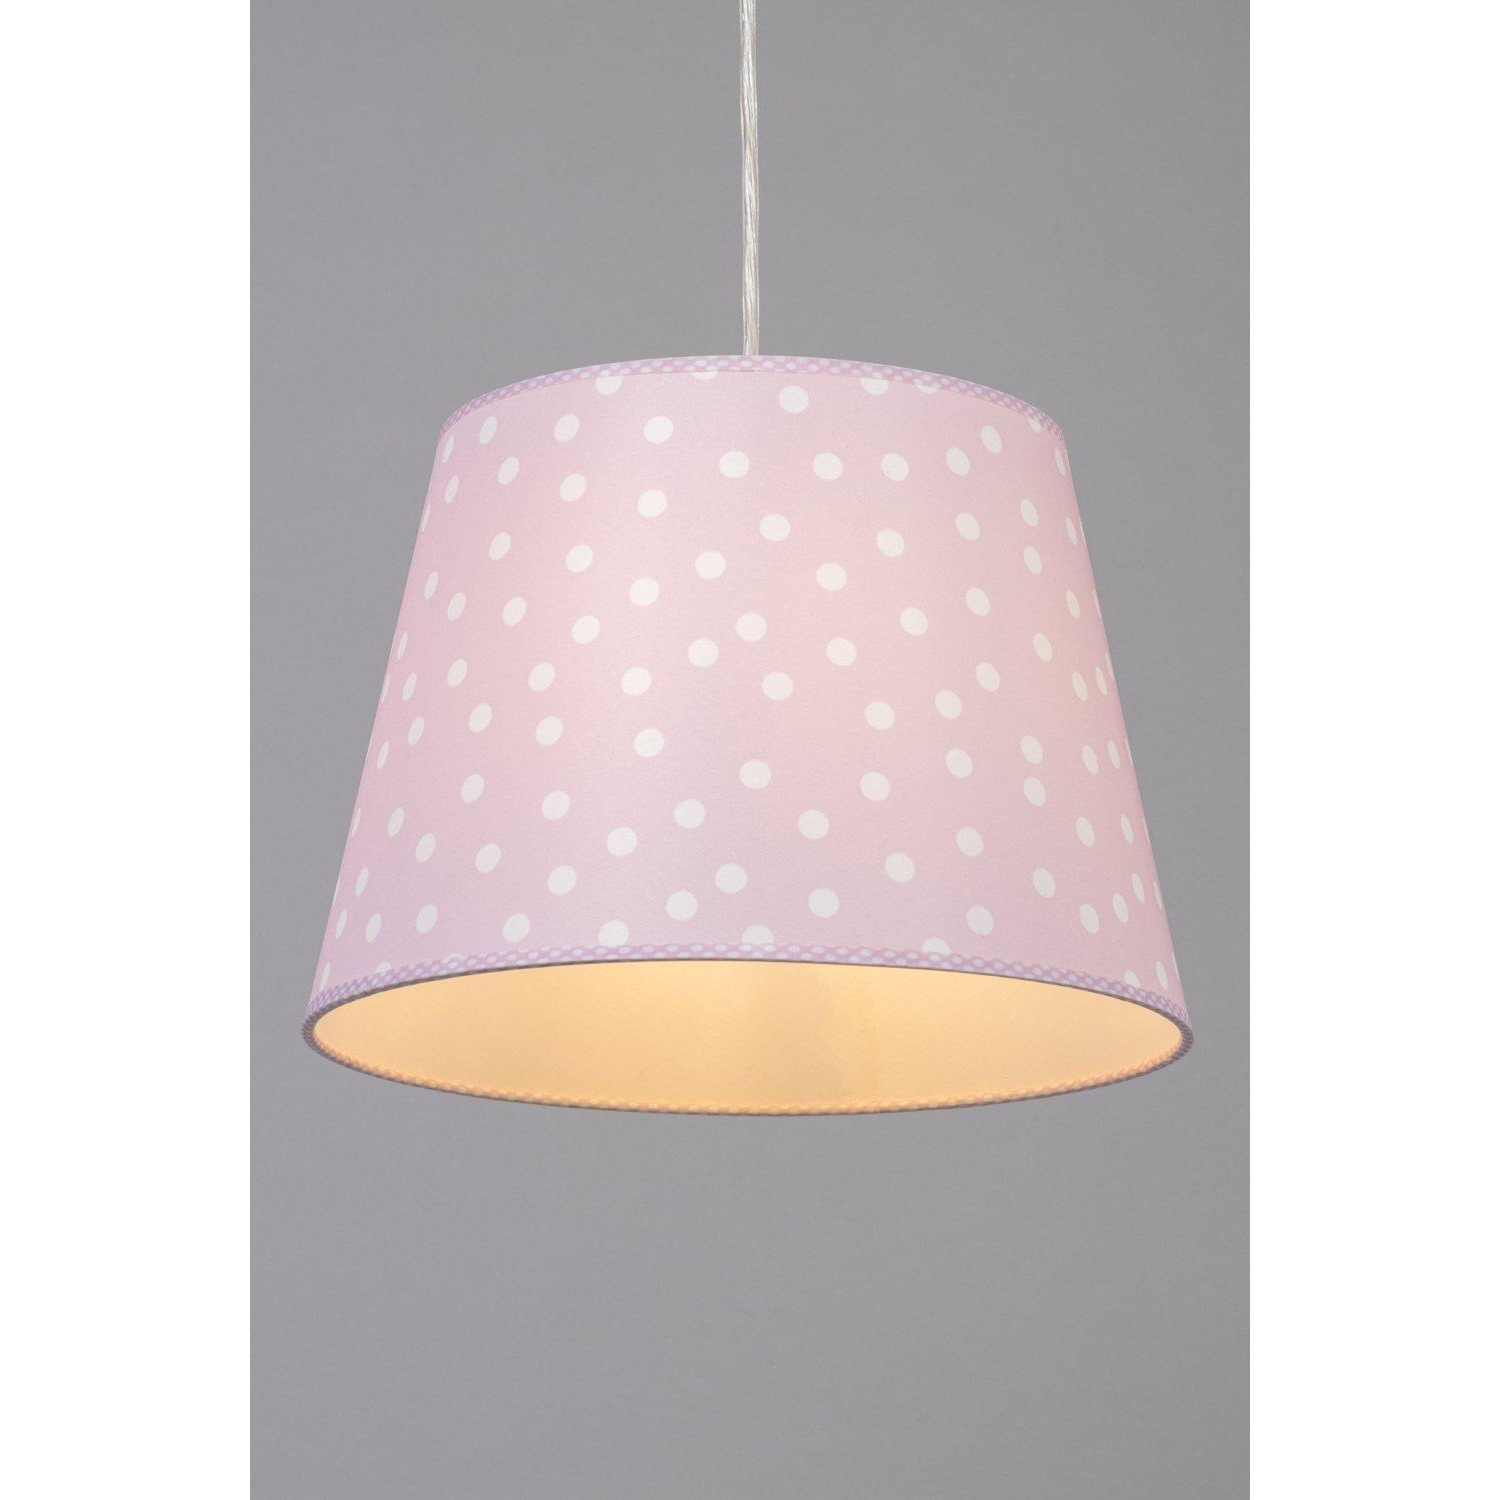 Glow Polka Easy Fit Light Shade - image 1